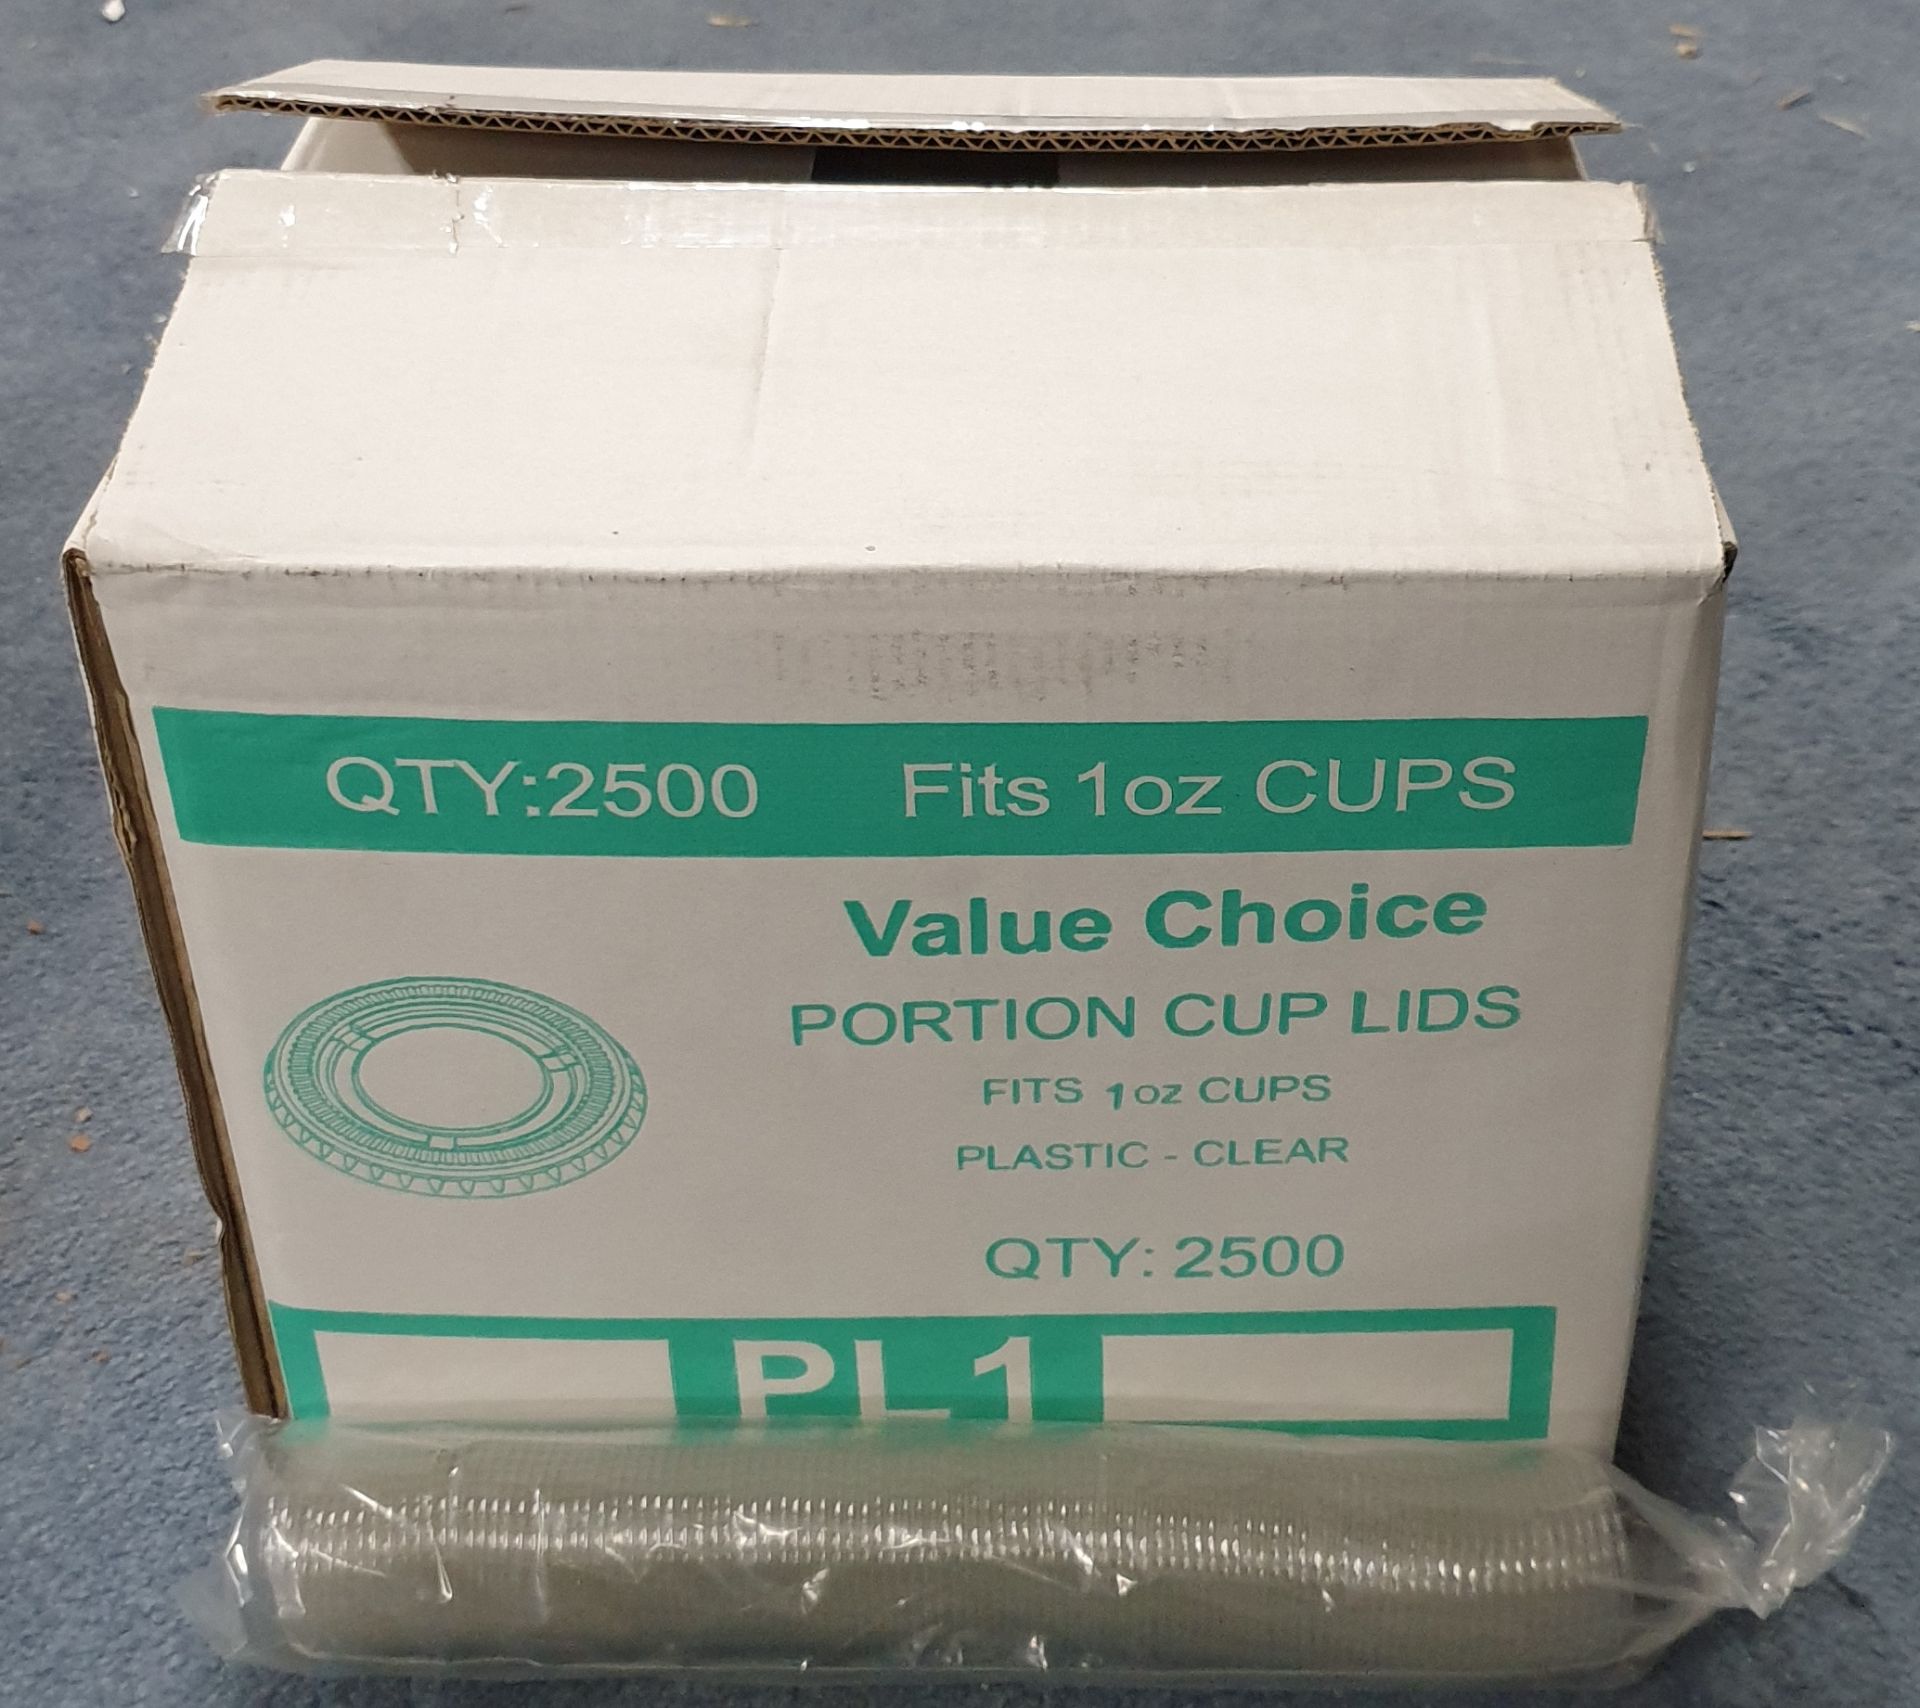 5 x Box of Portion Cups & 5 Box of Lids by Value Choice - Image 4 of 4